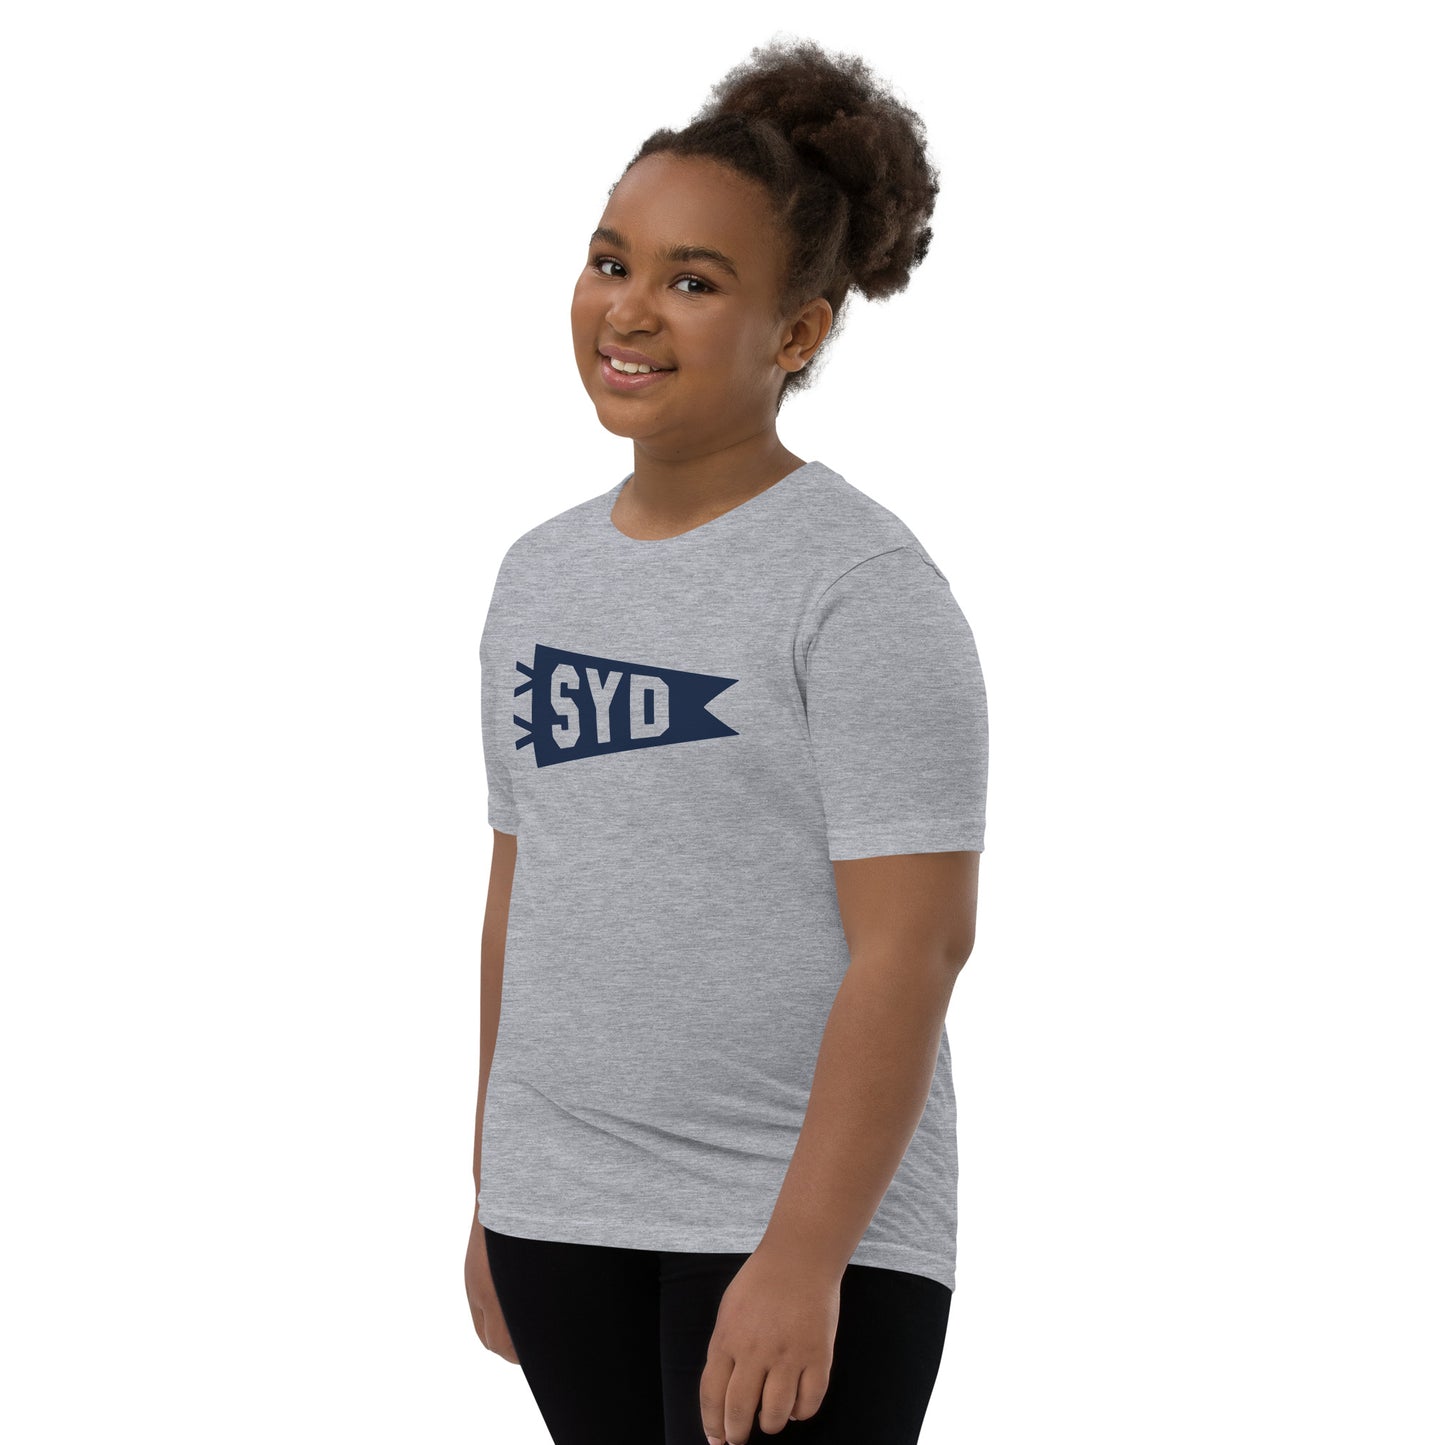 Kid's Airport Code Tee - Navy Blue Graphic • SYD Sydney • YHM Designs - Image 04